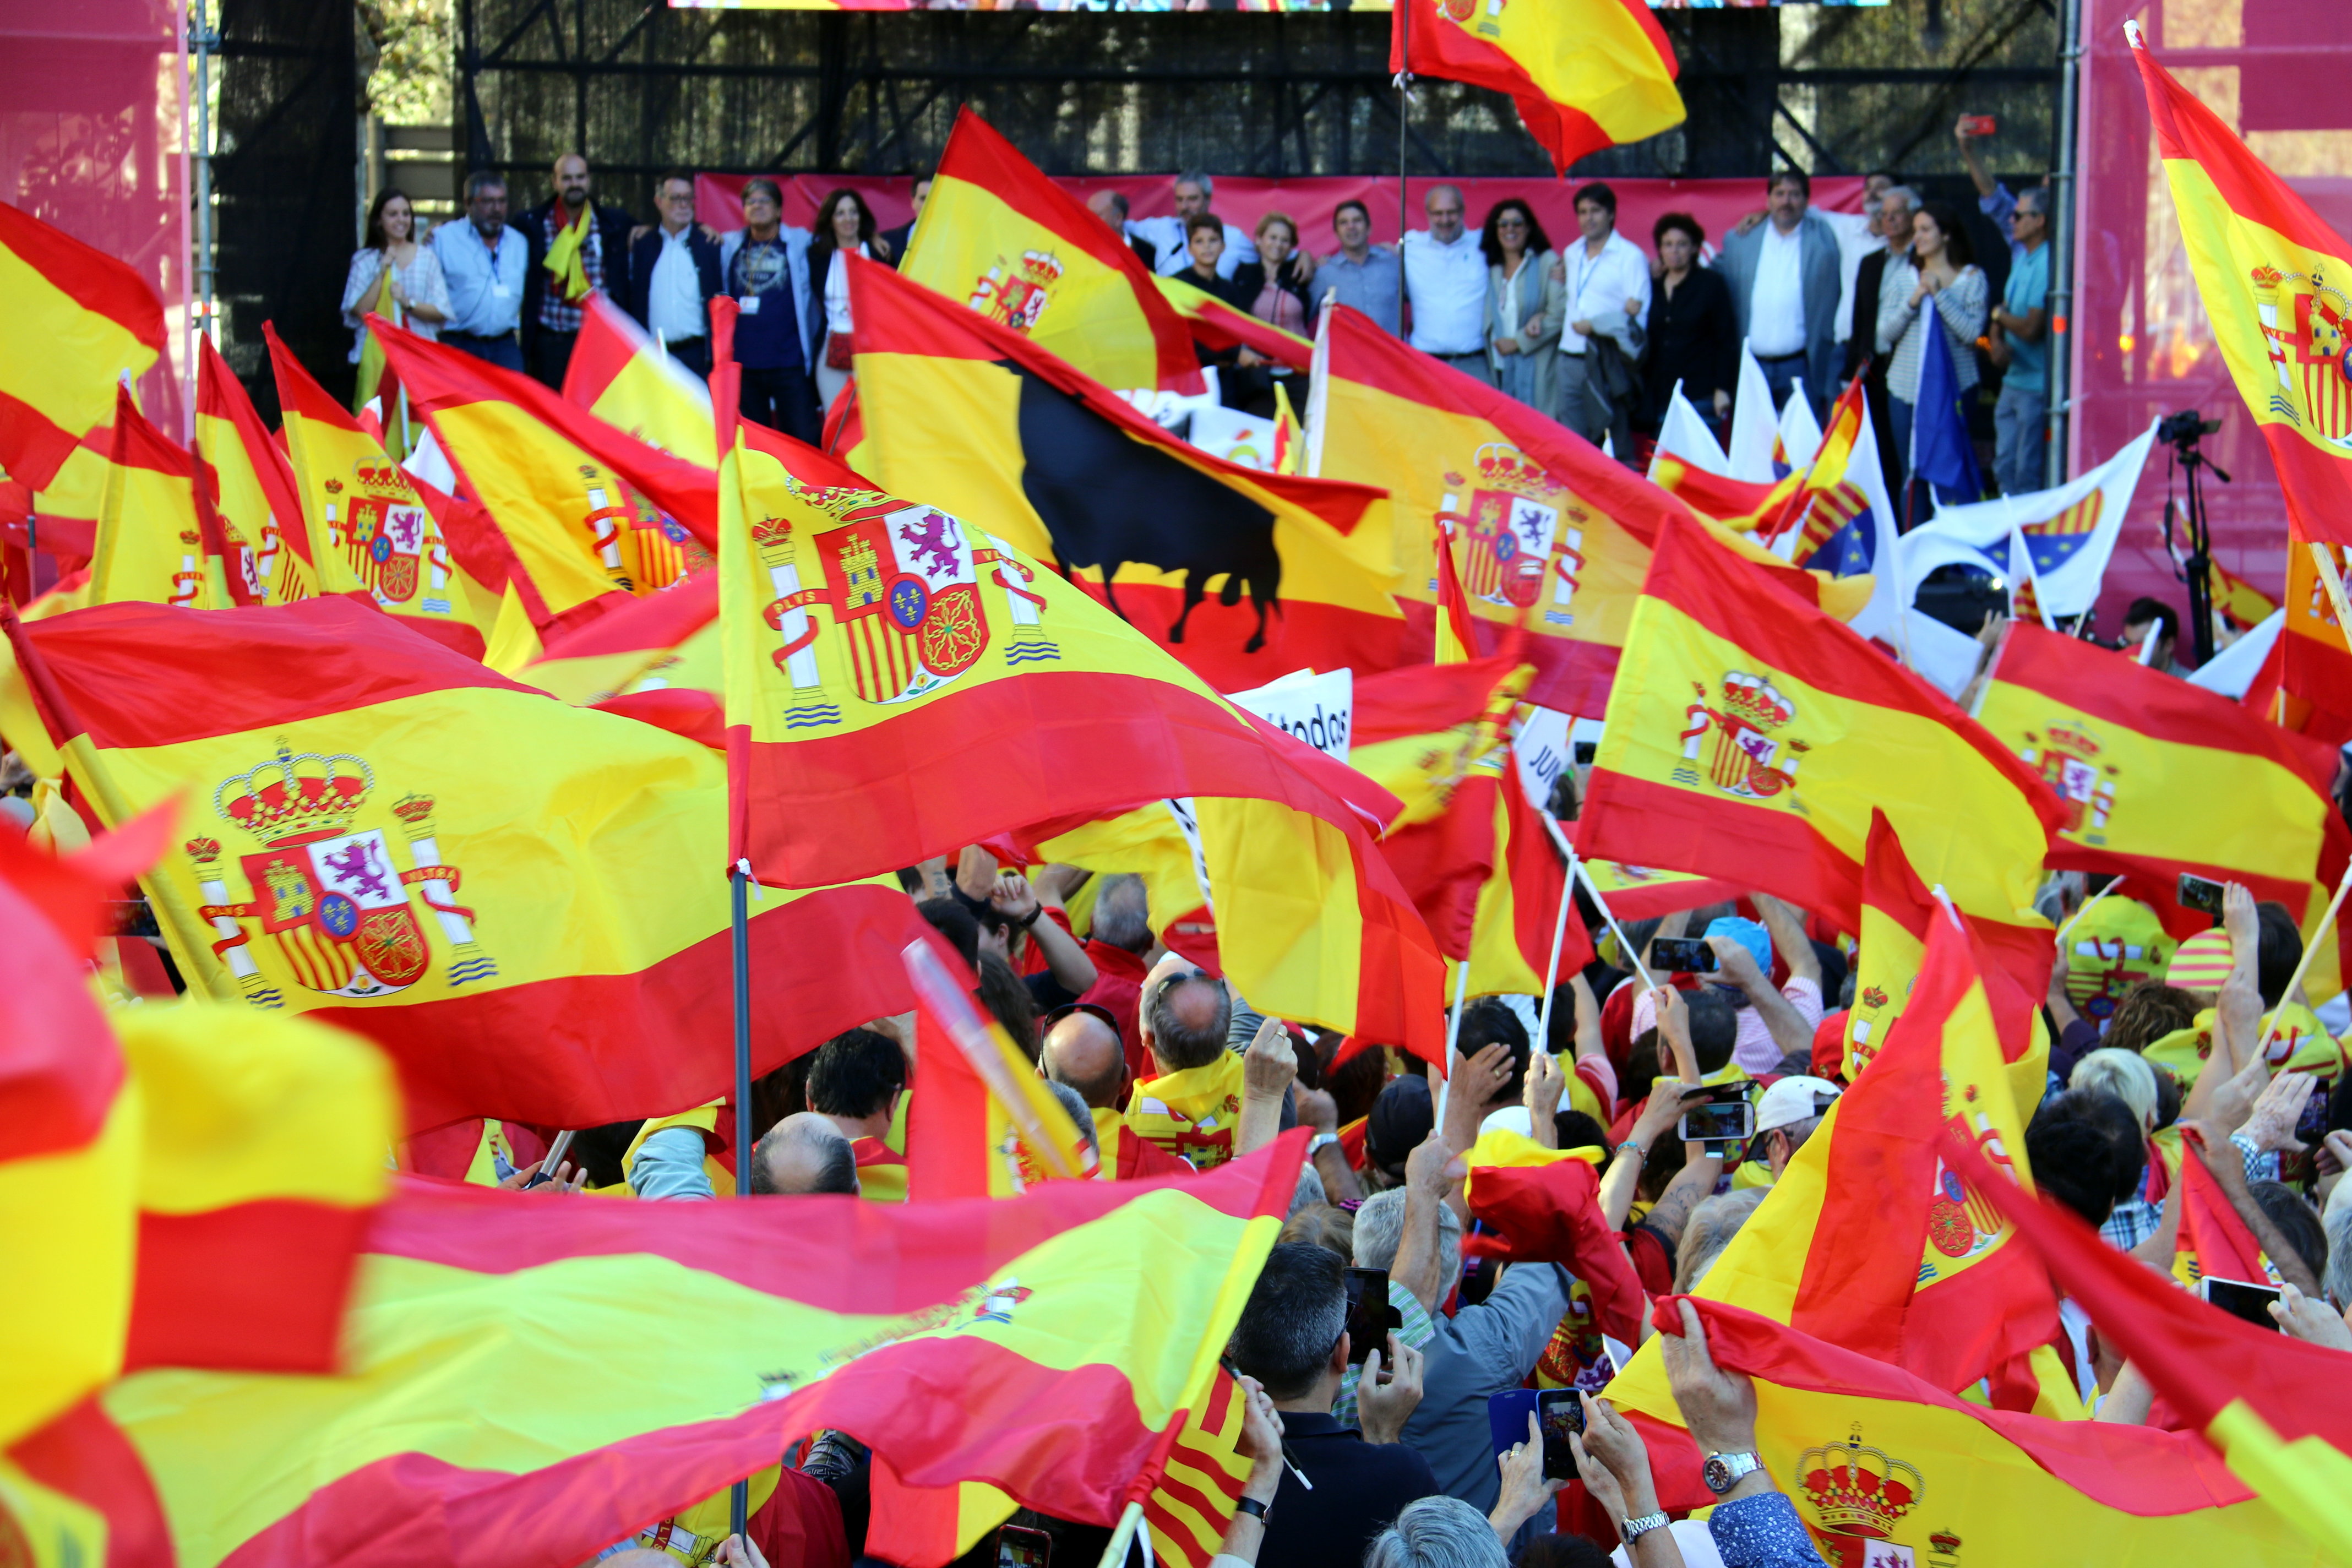 Spanish flags in the anti-independence demonstration in Barcelona (by Jordi Bataller)